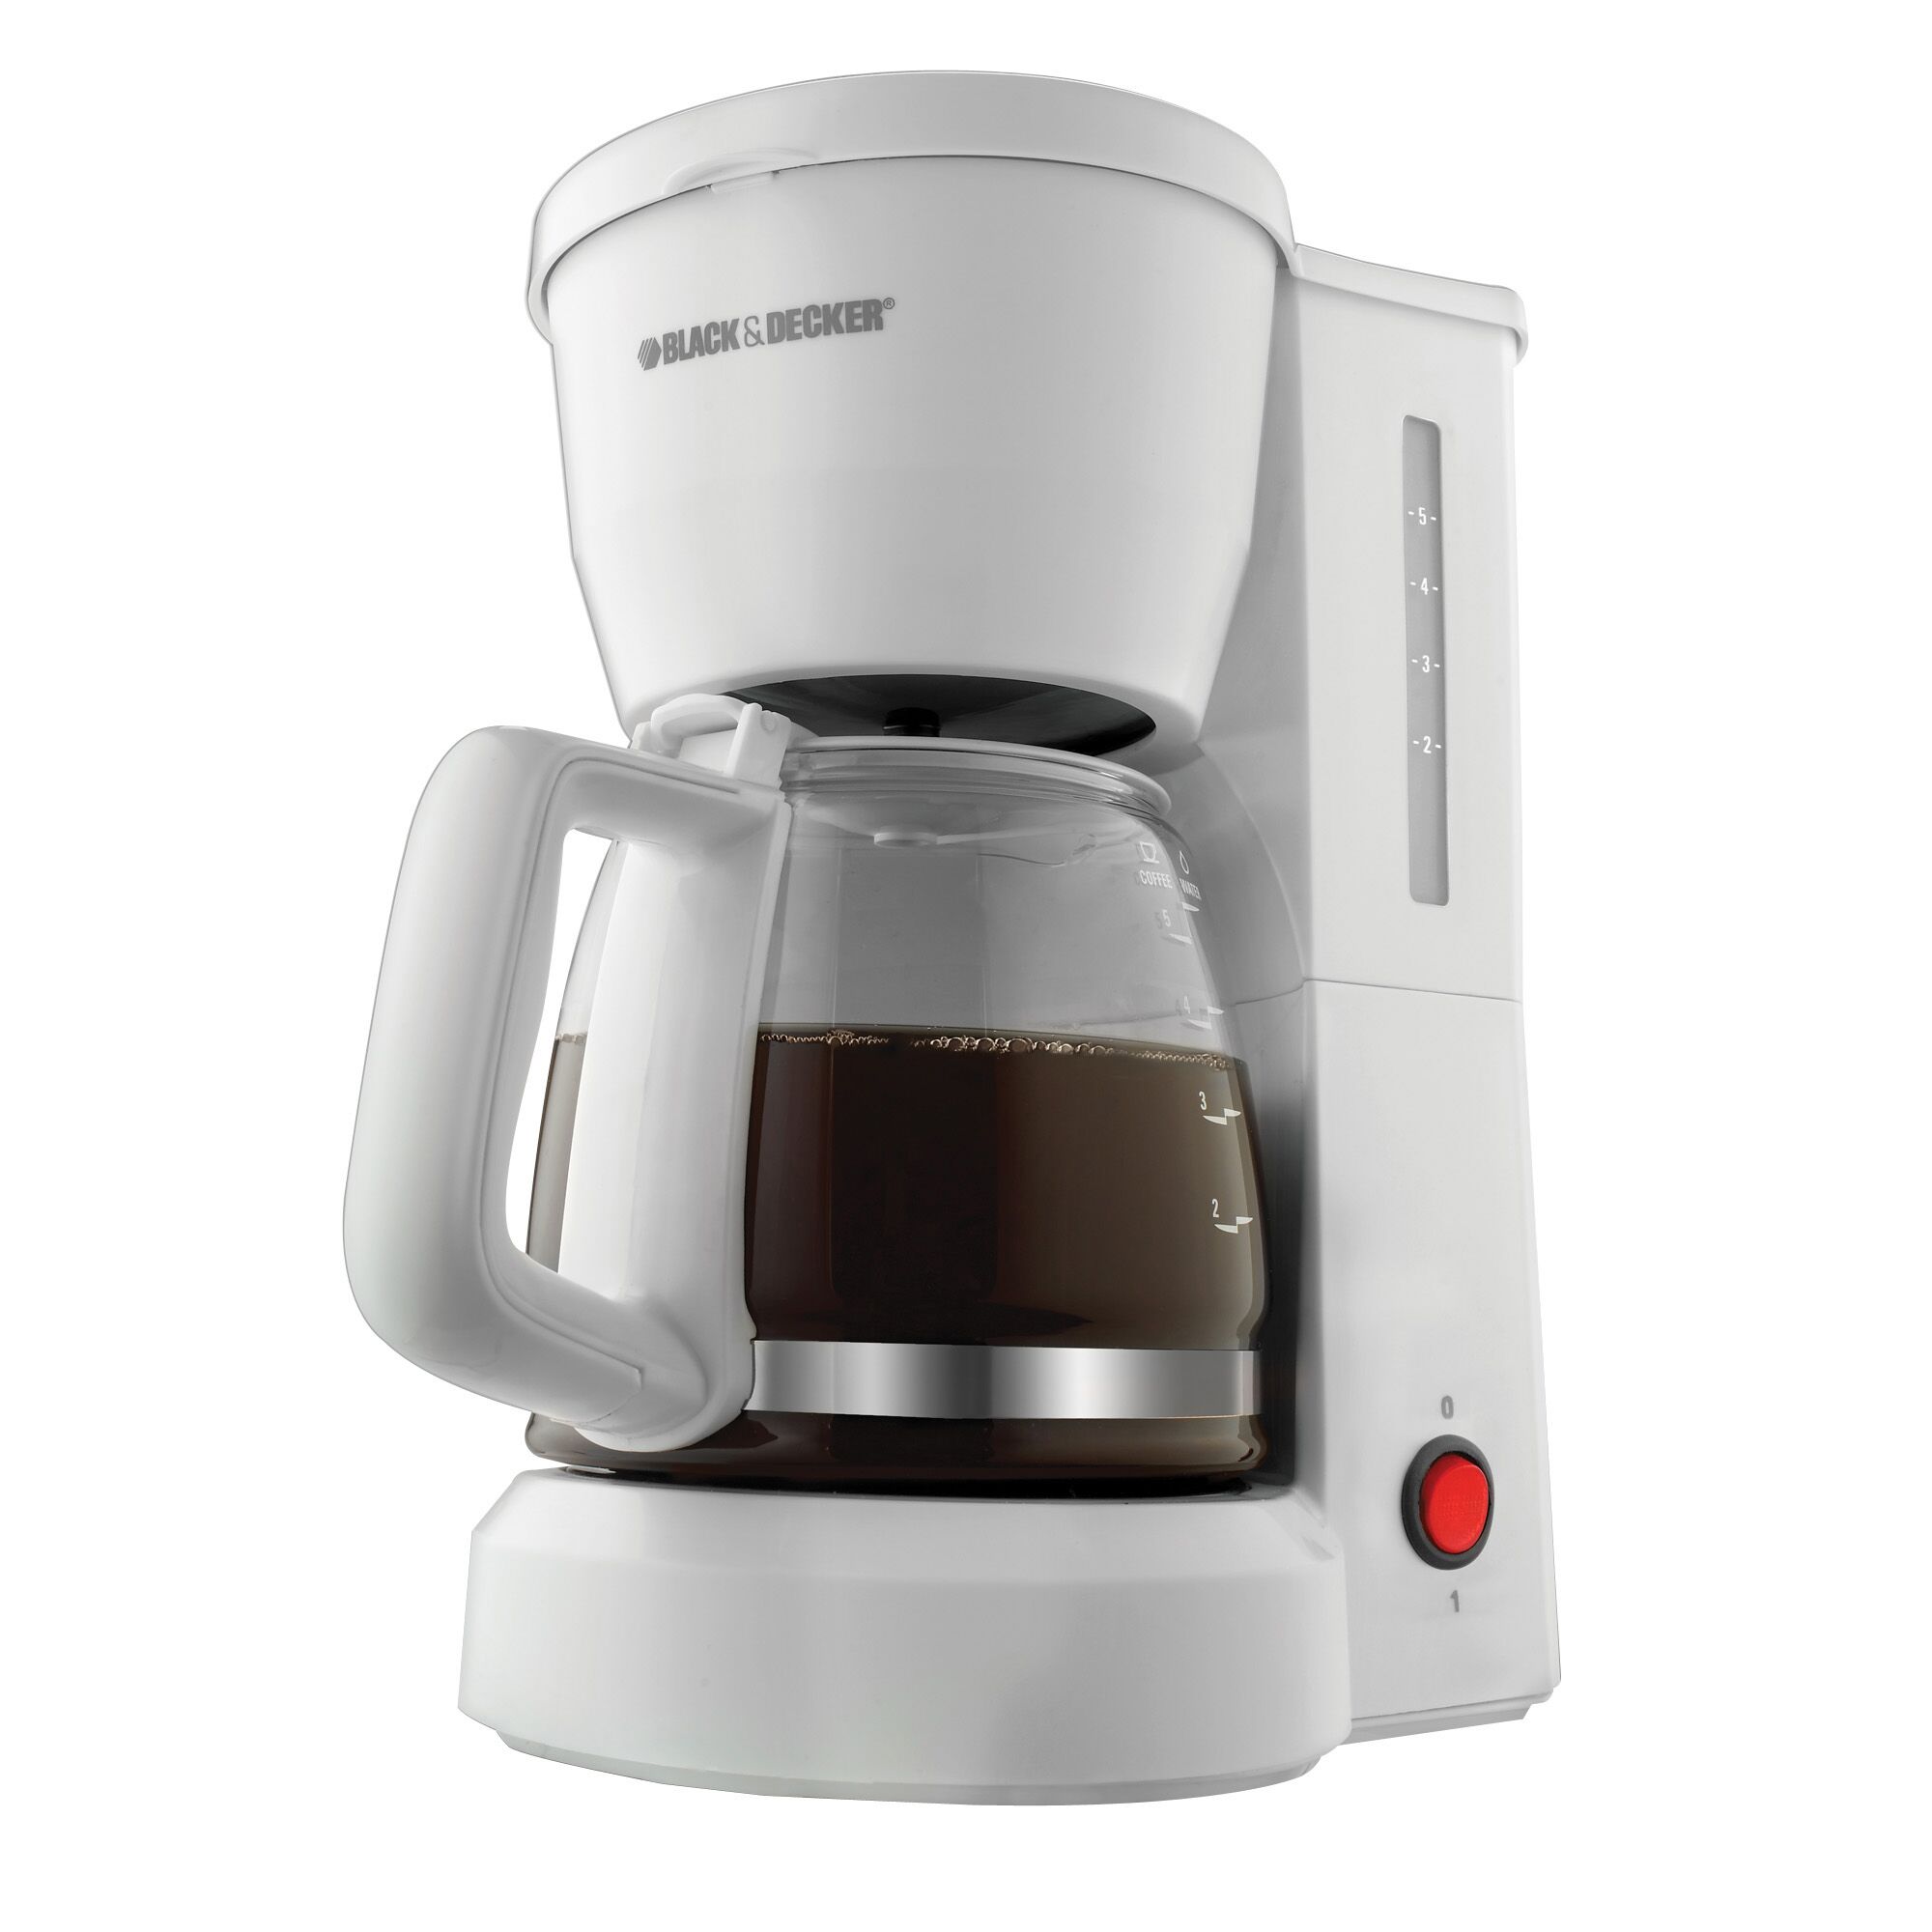 Profile of 5 Cup Coffee Maker containing brewed coffee in carafe.